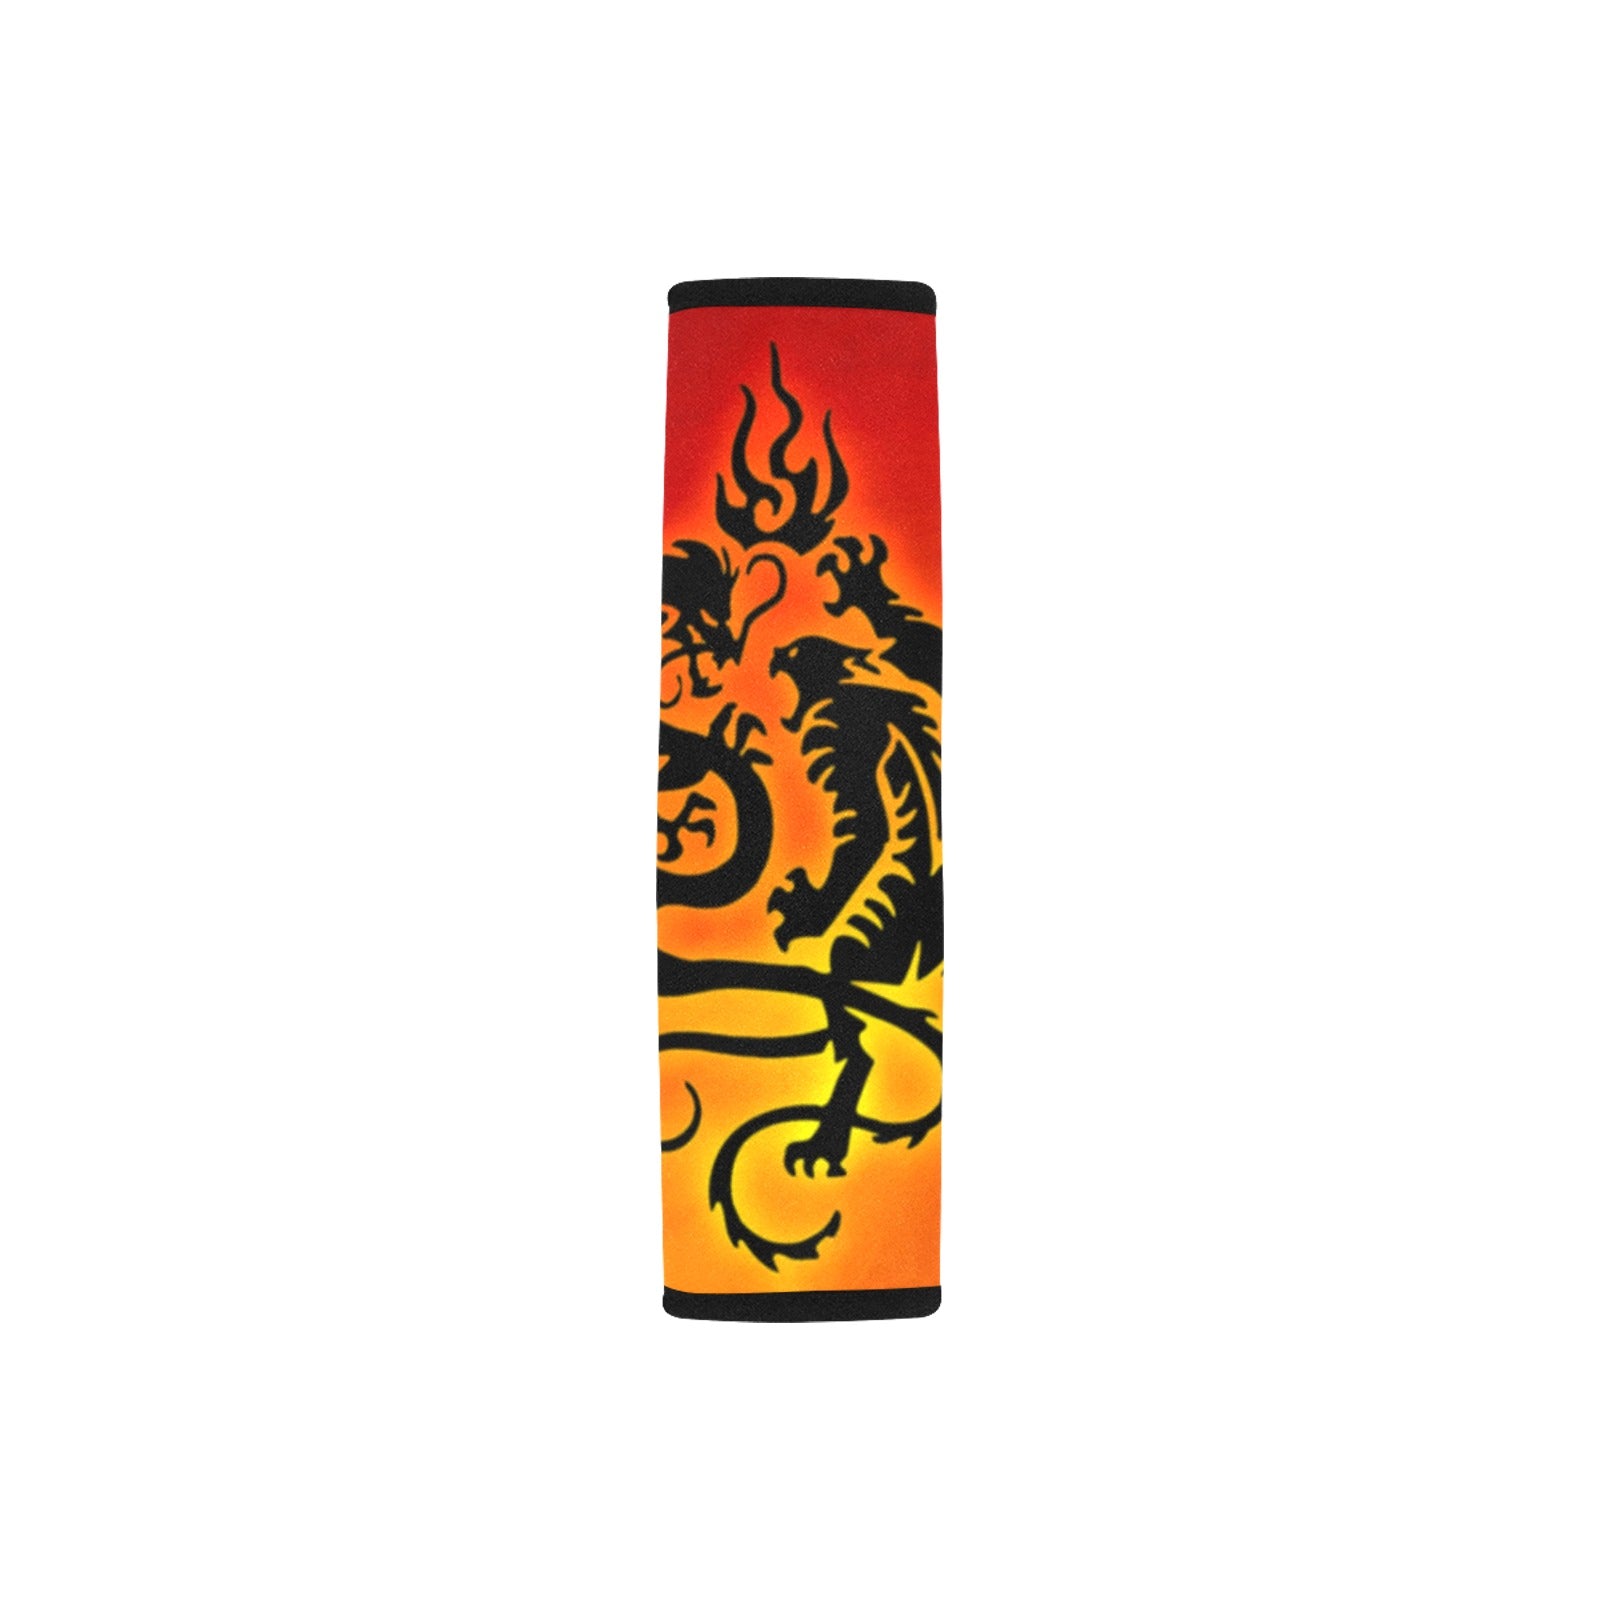 Tribal Tiger and Dragon Seat Belt Cover 7" x 10"